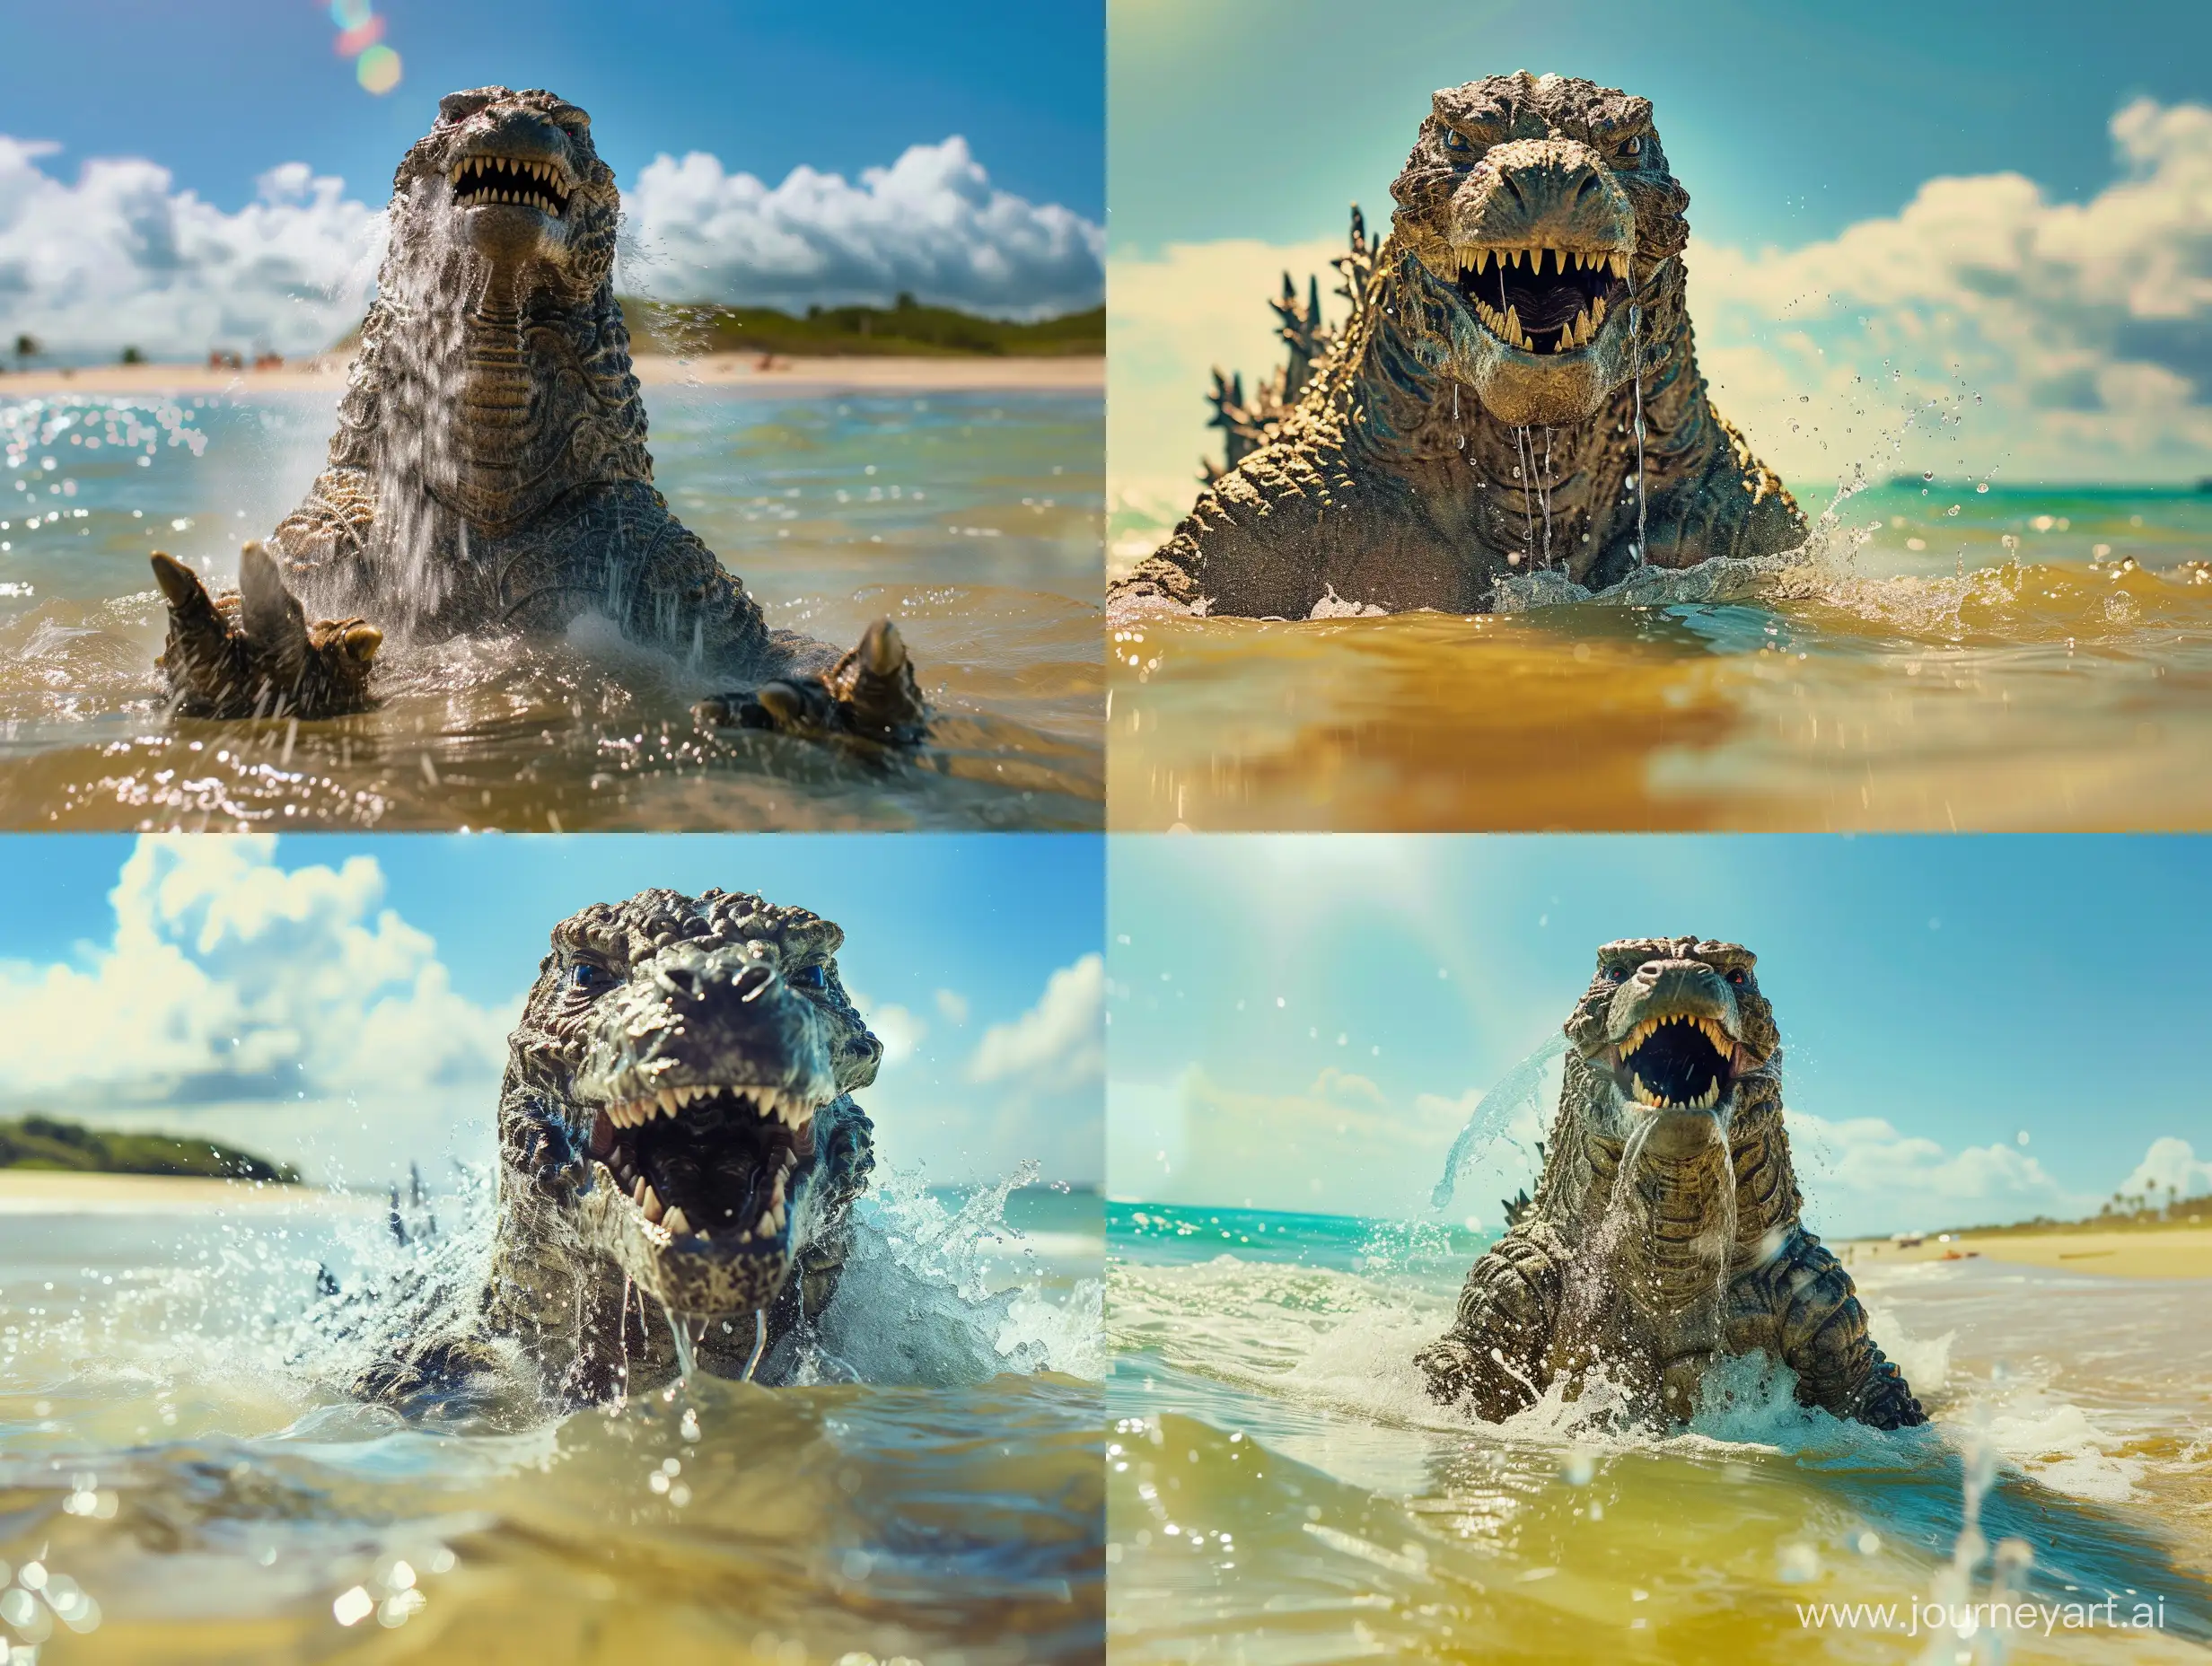 Majestic-Godzilla-Emerges-from-Ocean-Waters-on-a-Sunny-Beach-Day